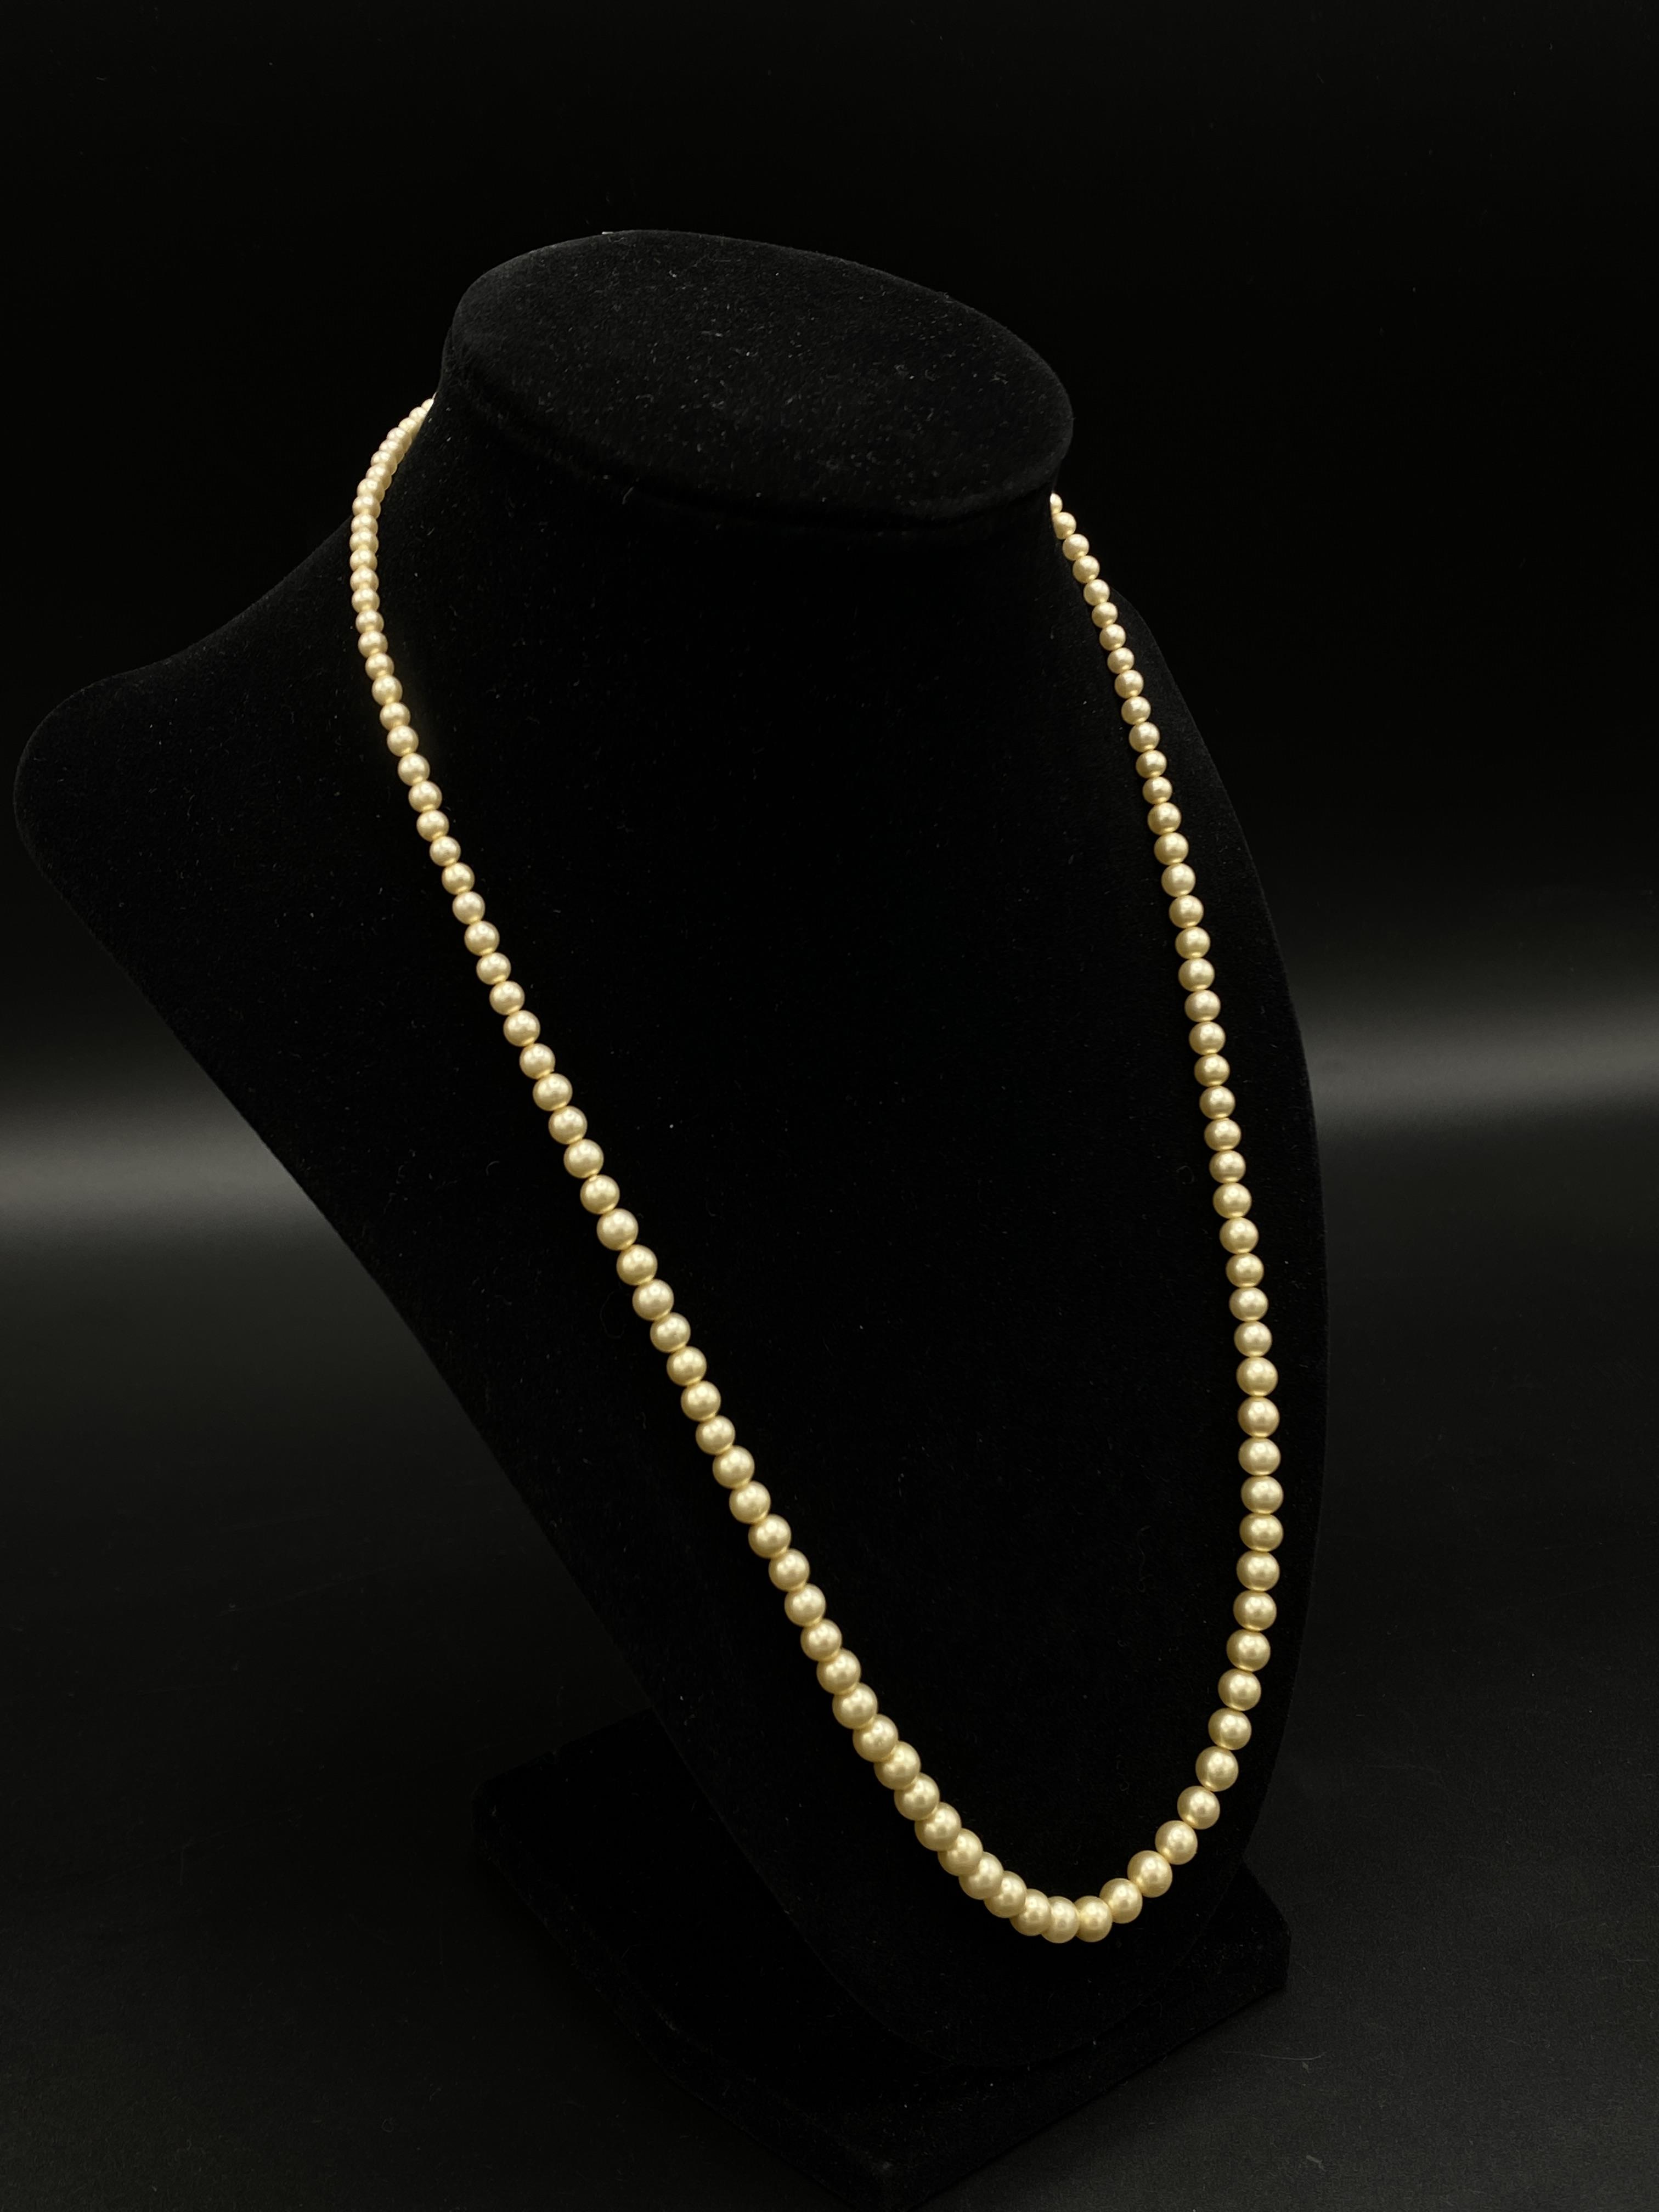 Two pearl necklaces with gold clasps - Image 3 of 9